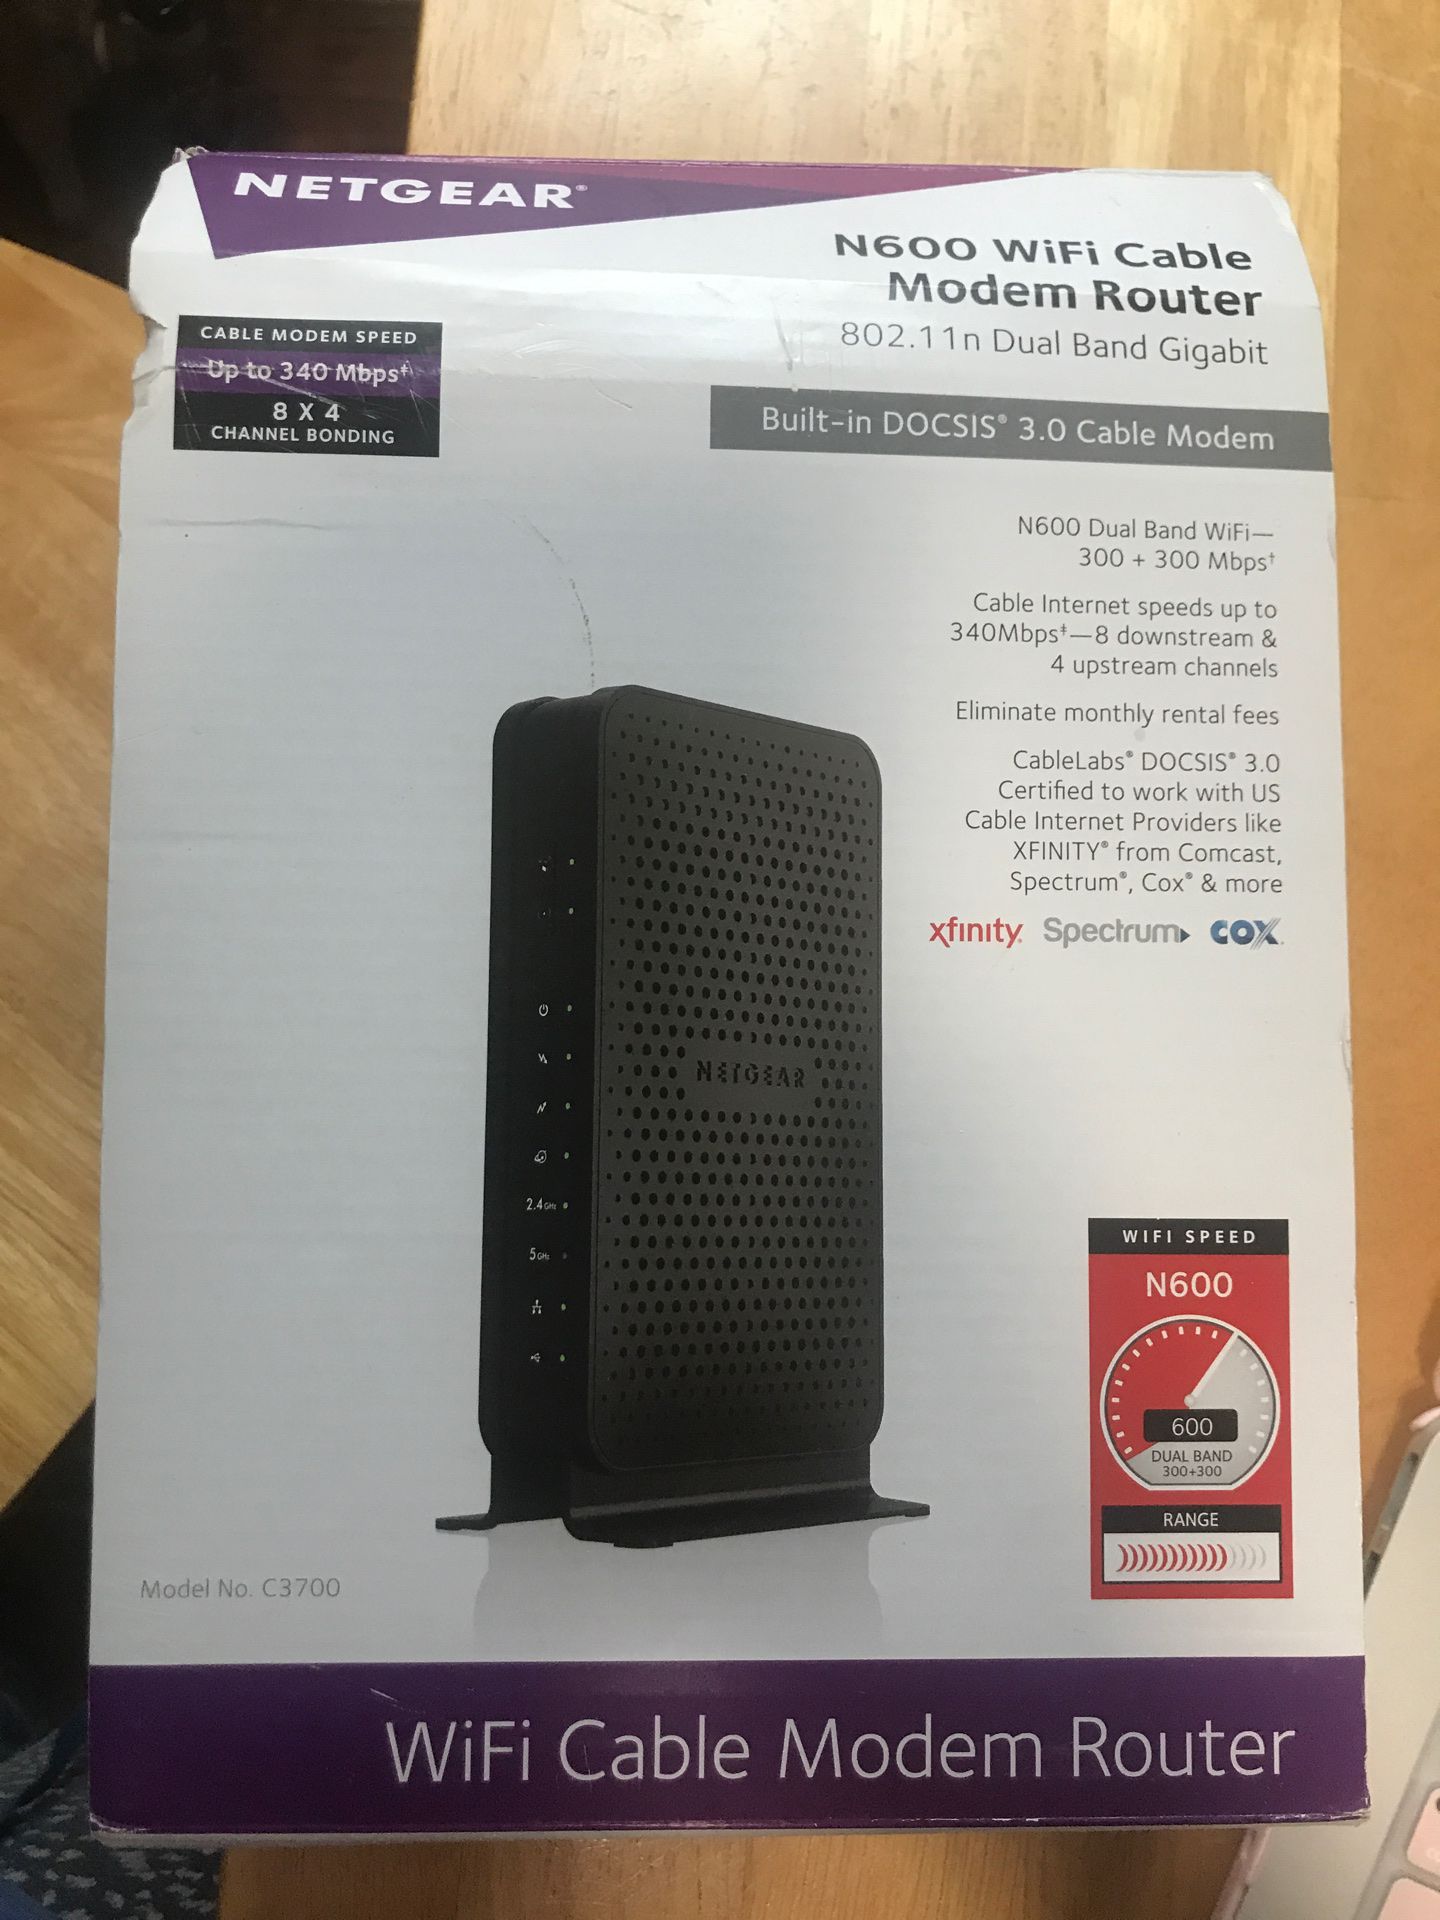 Netgear N600 WiFi Cable Modem Router works with xfinity spectrum and cox